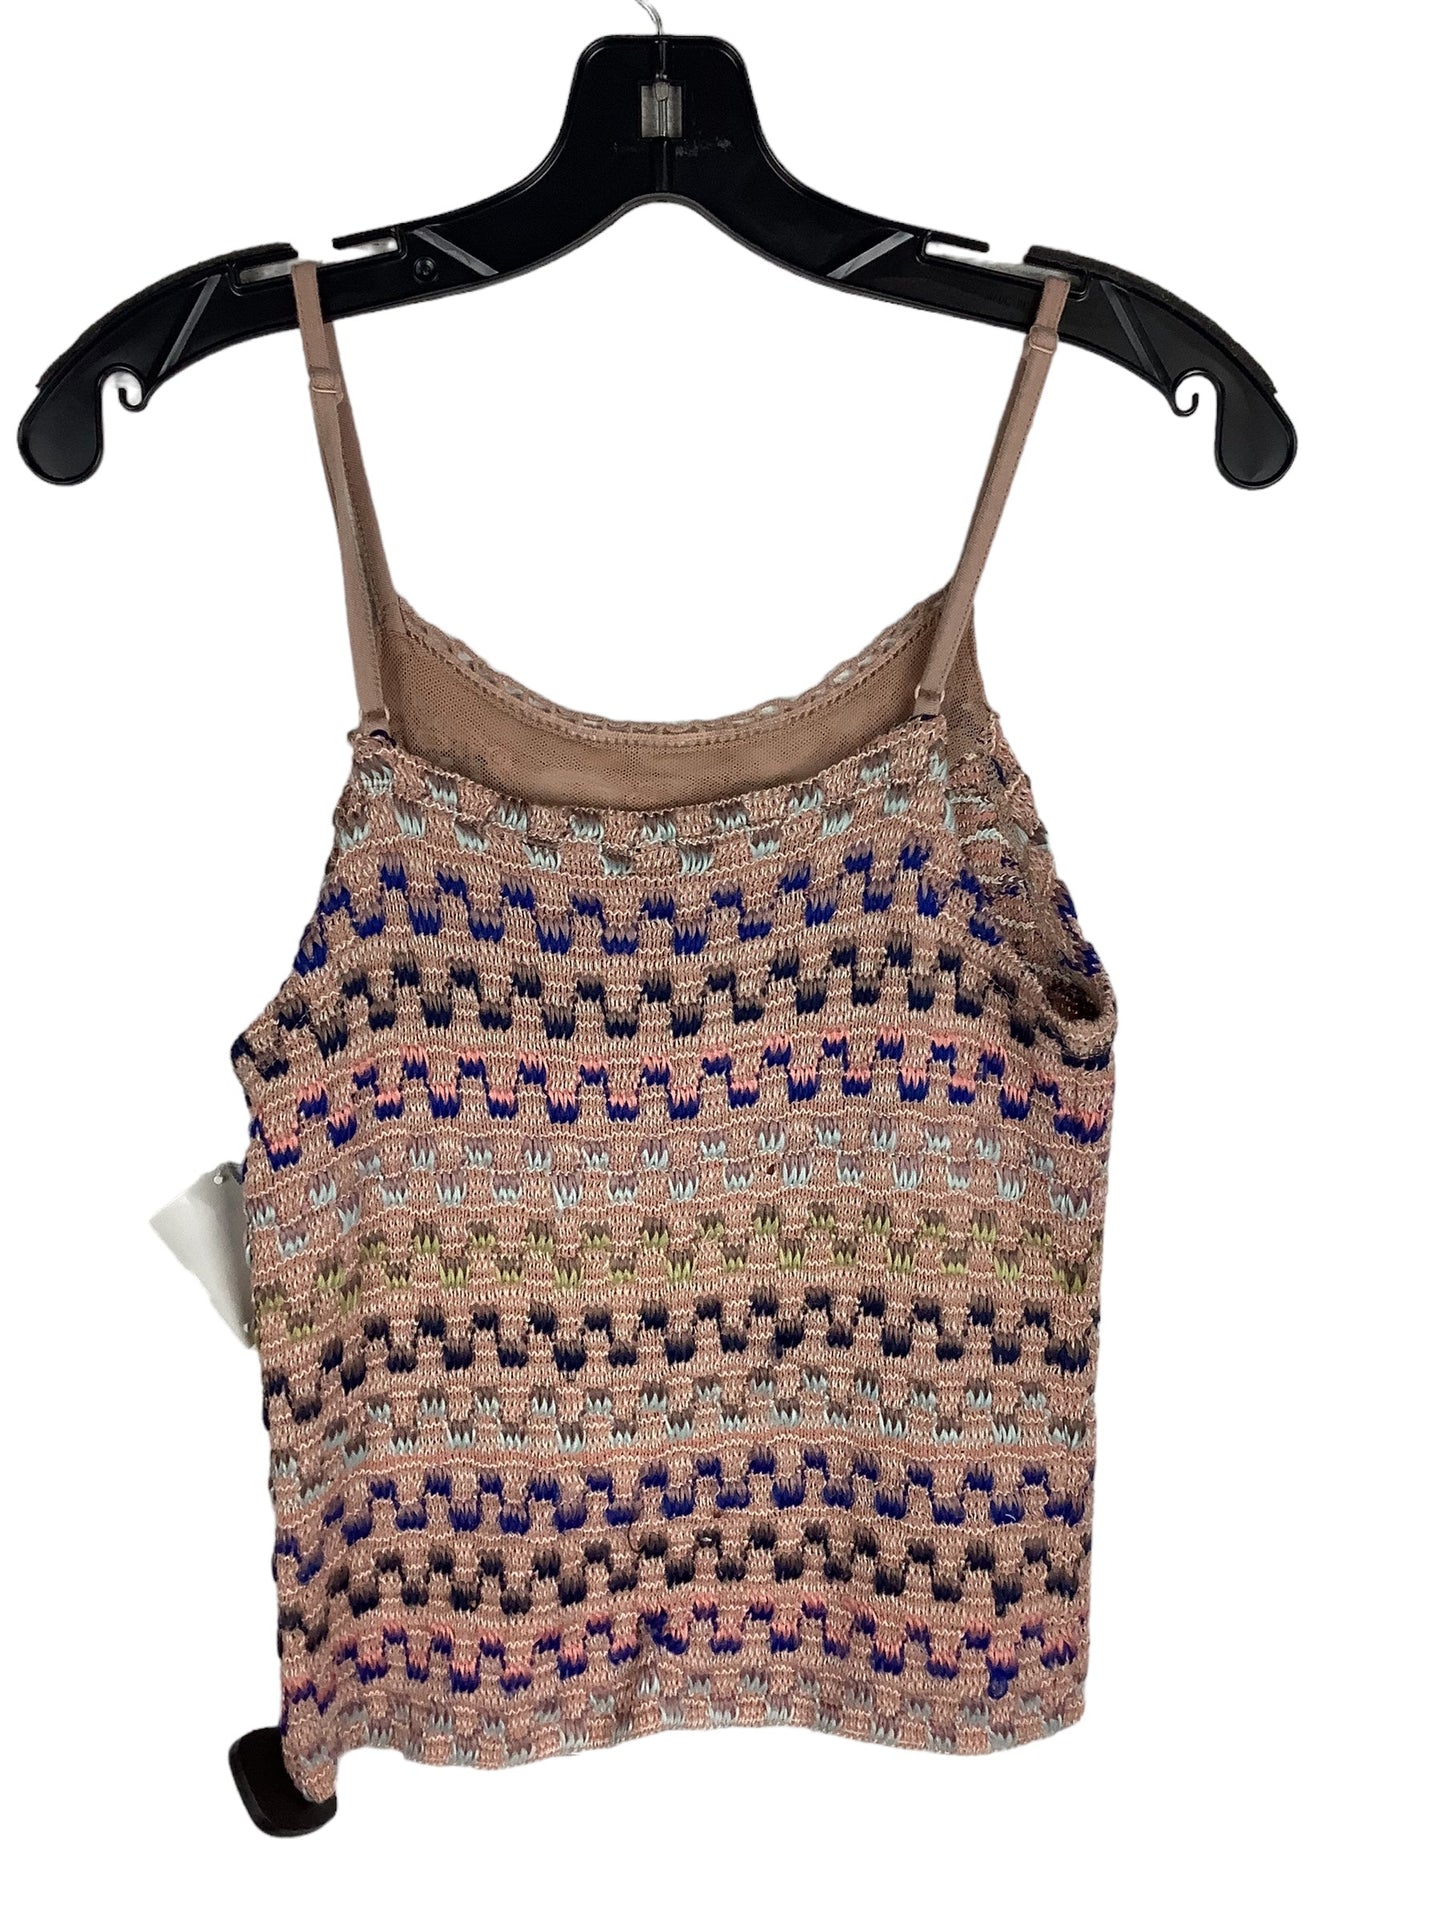 Multi-colored Top Sleeveless Free People, Size S